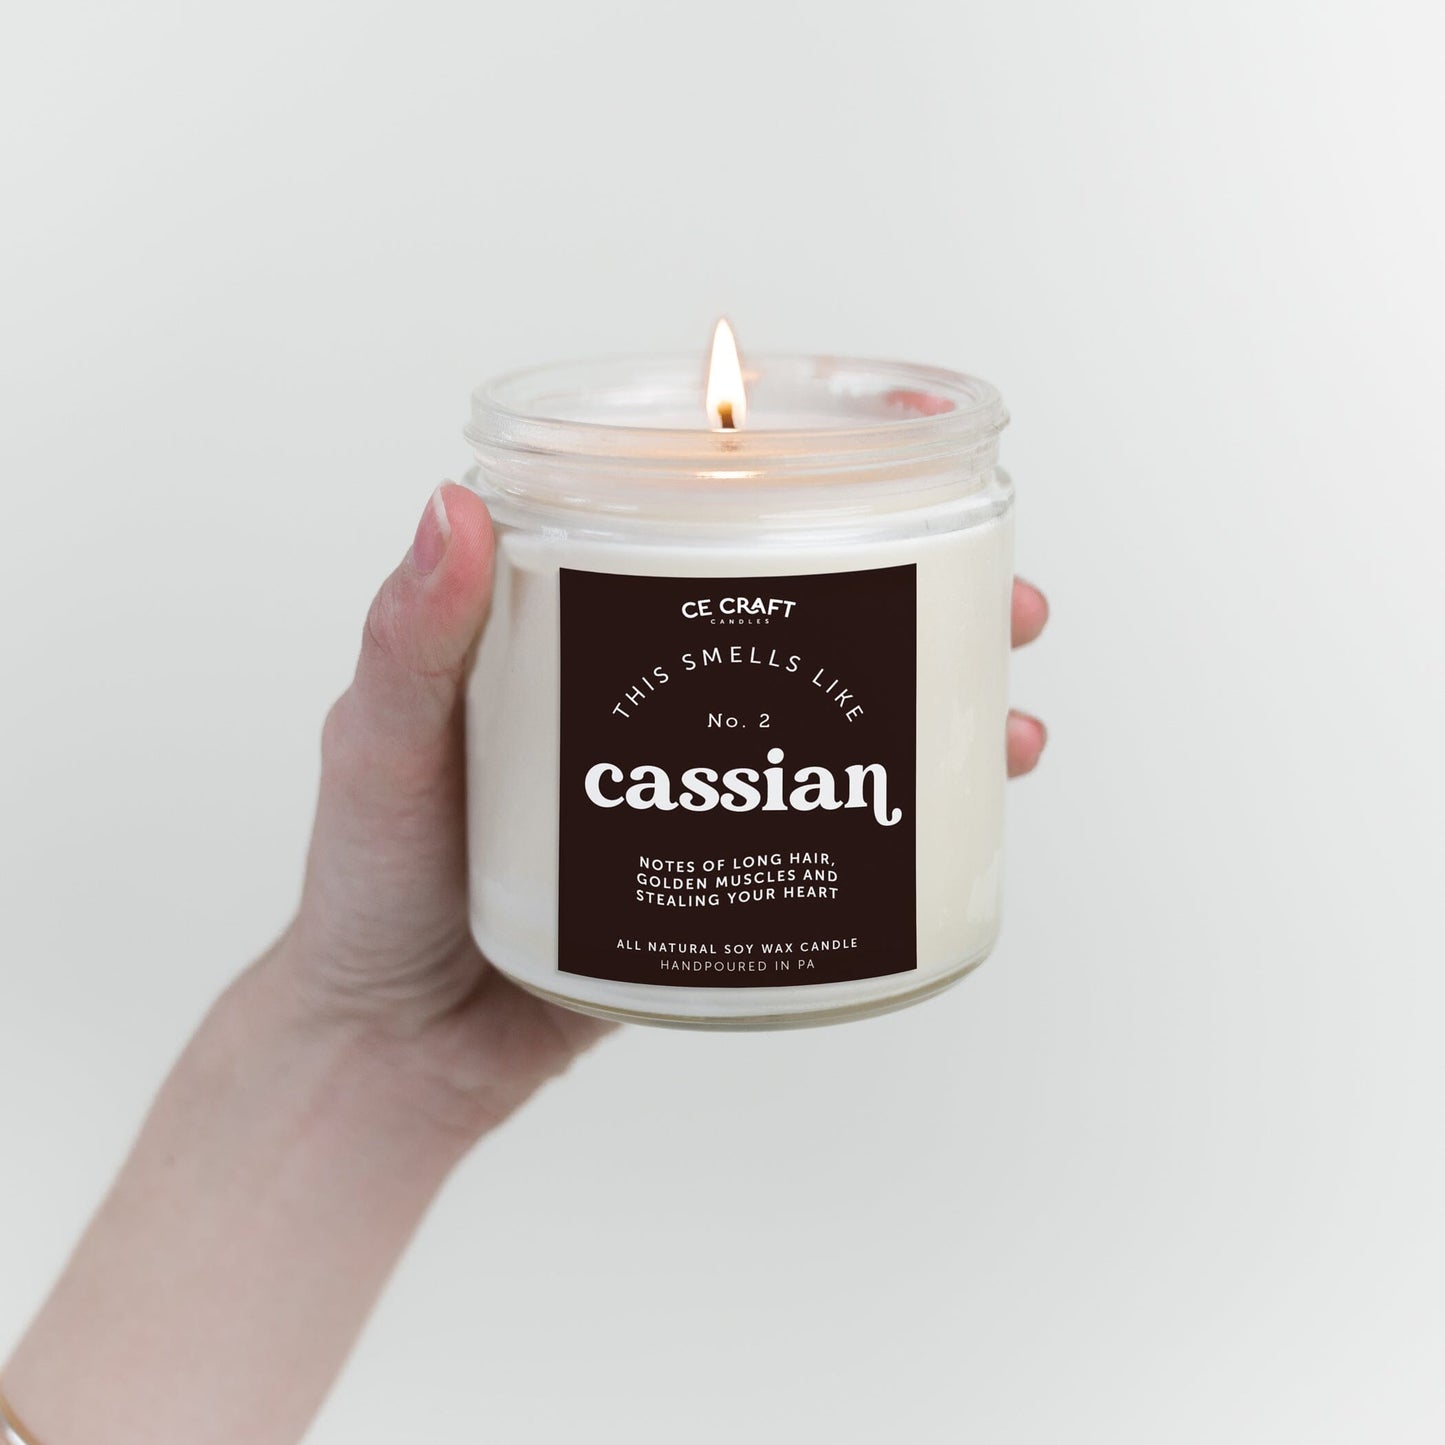 This Smells Like Cassian Candle CE Craft Large 